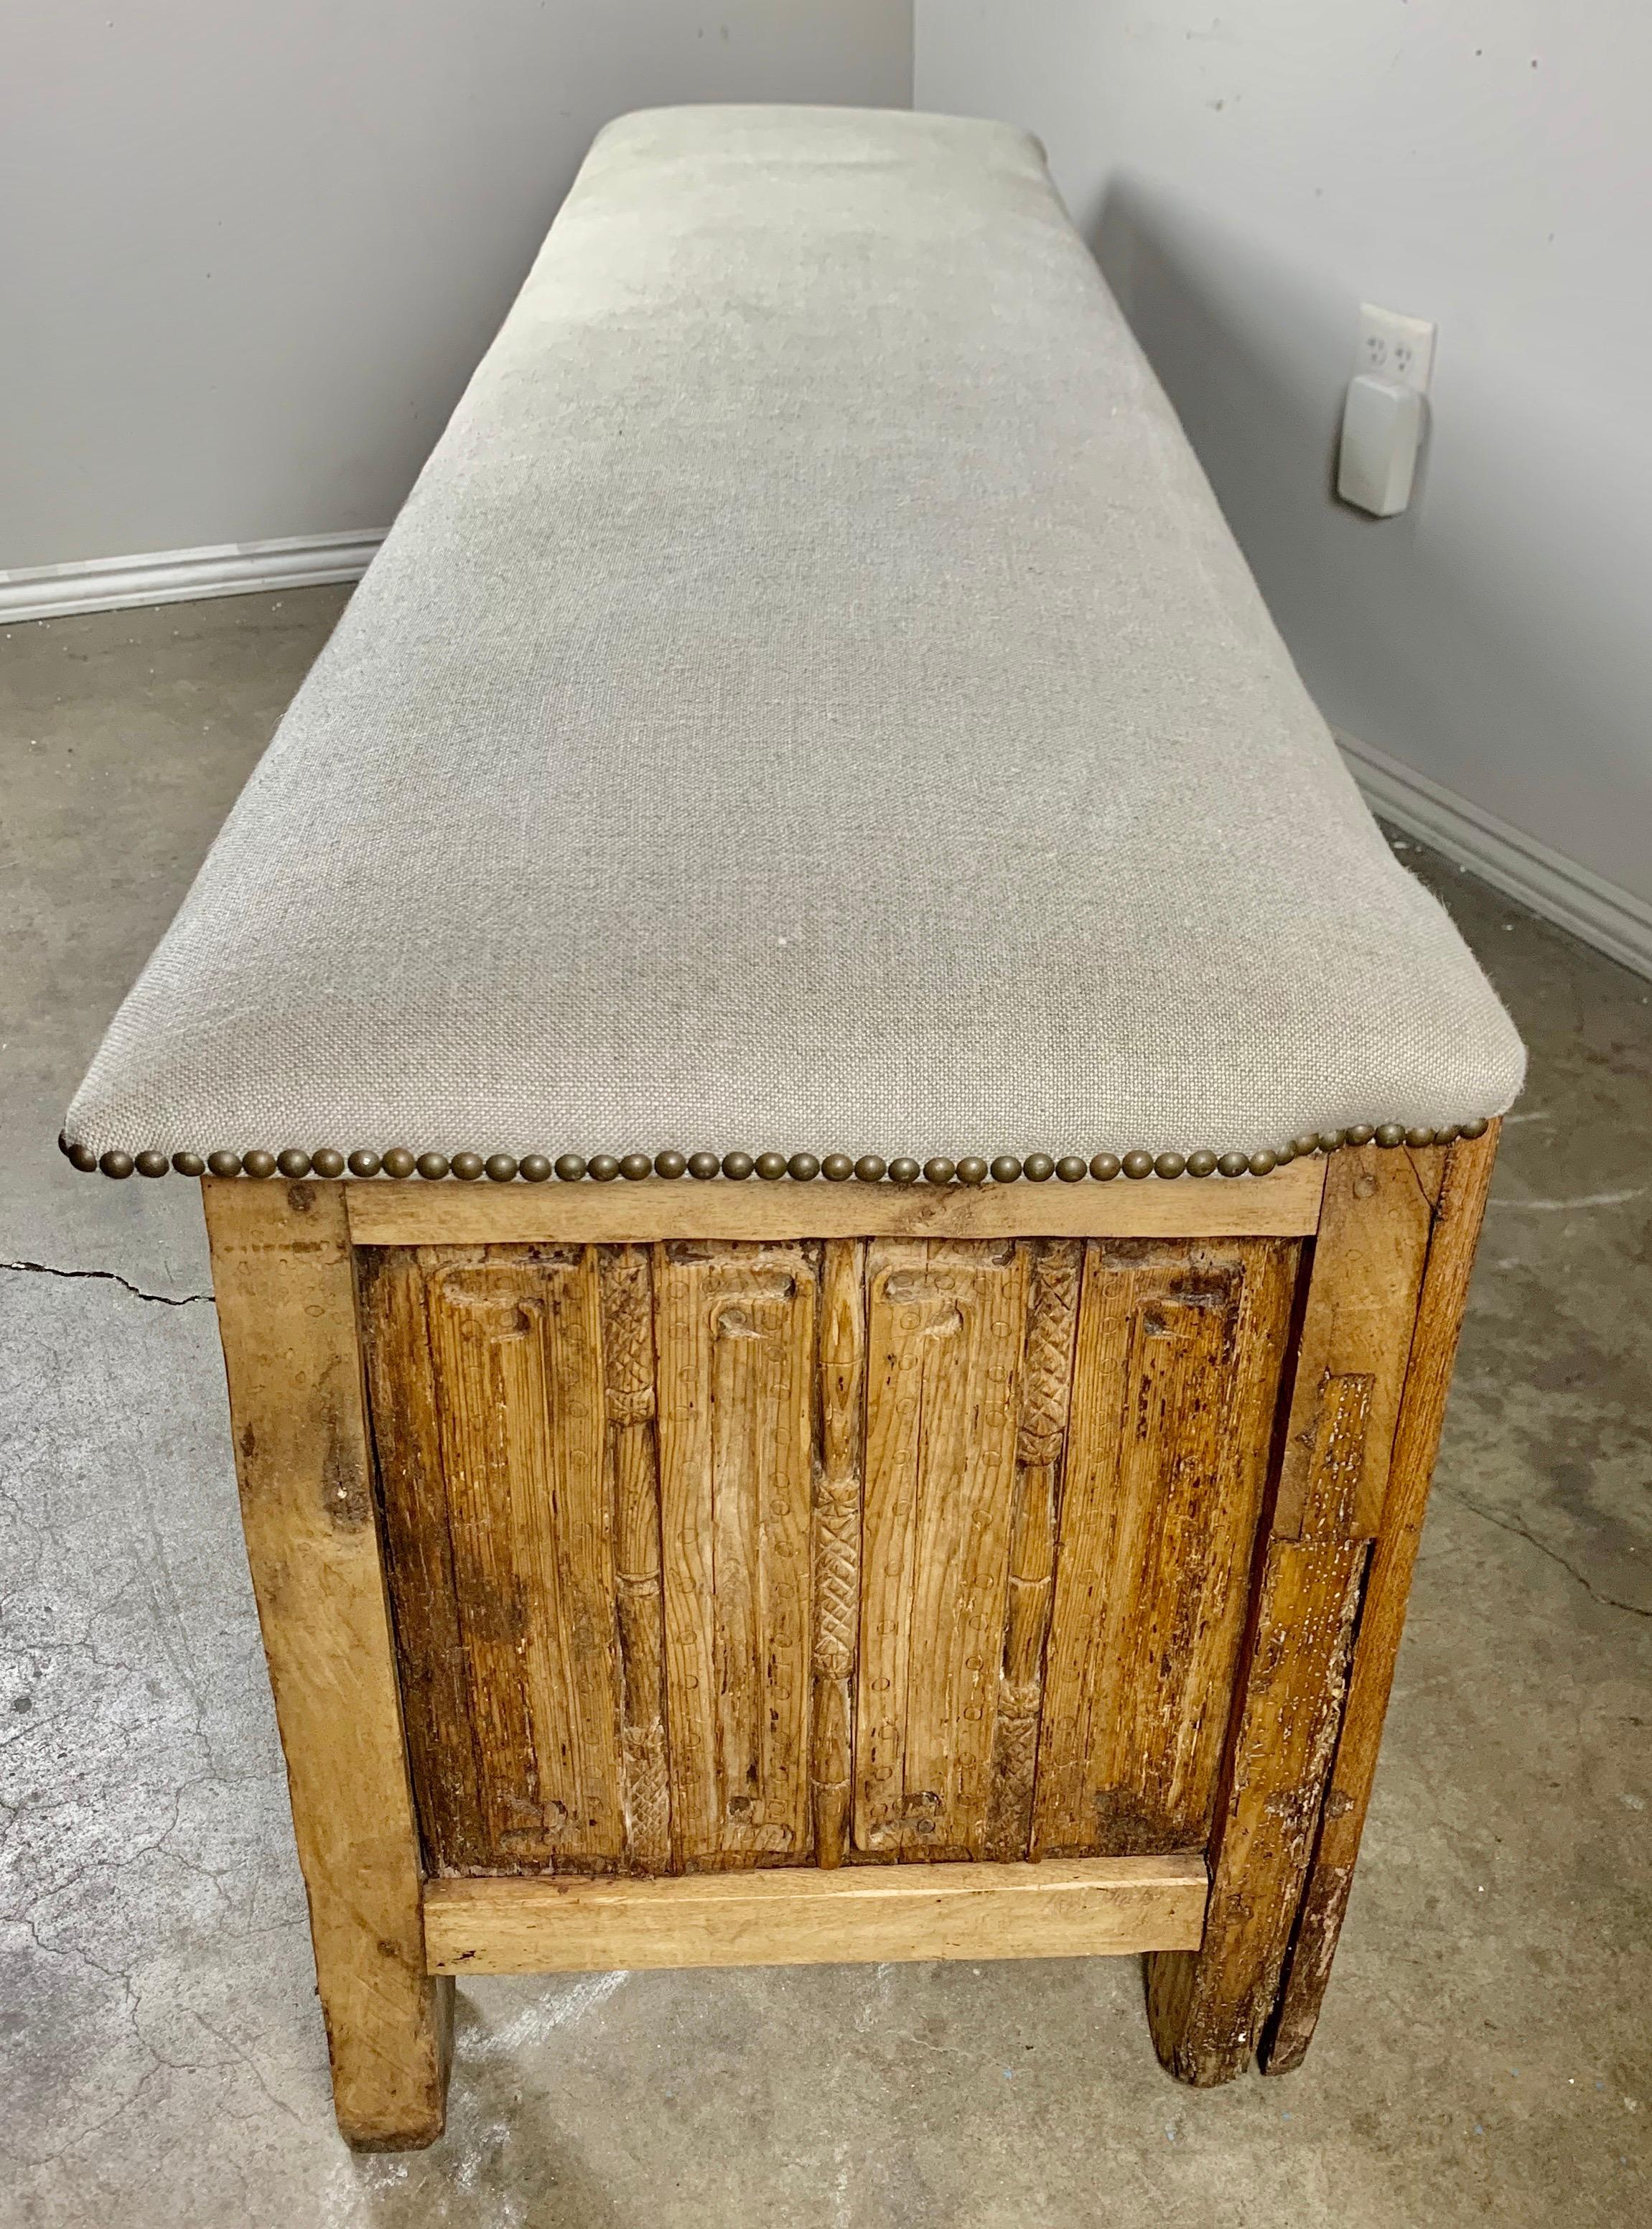 Monumental Spanish Carved Wood Bench with Linen Upholstery For Sale 2